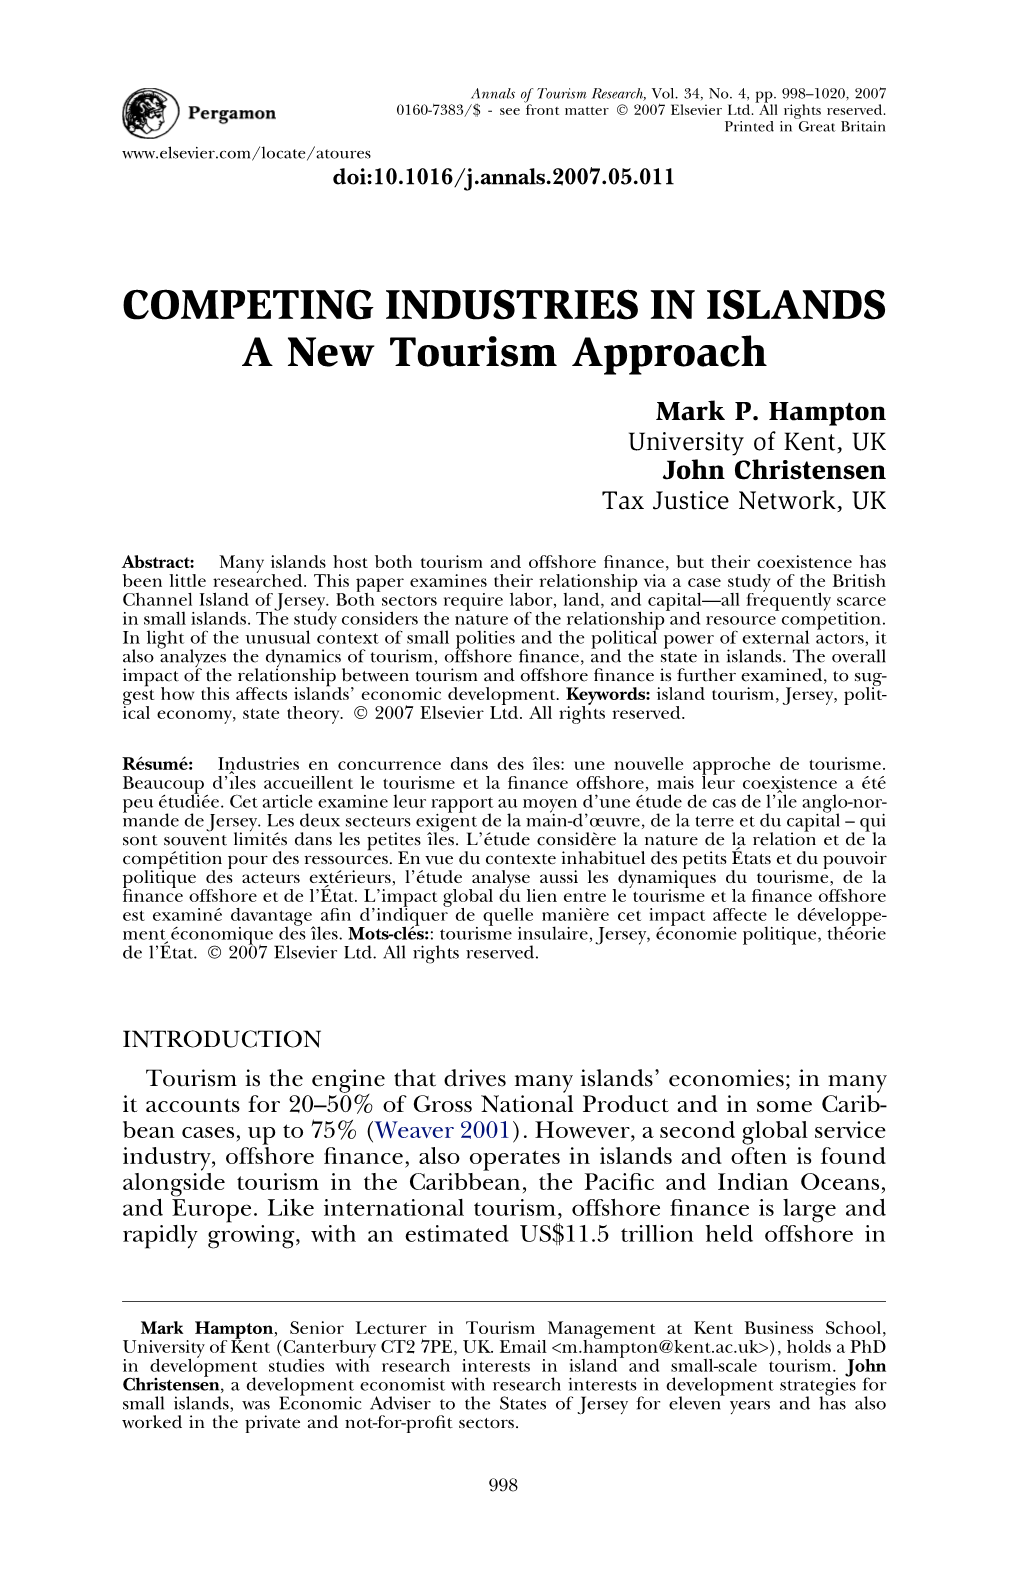 COMPETING INDUSTRIES in ISLANDS a New Tourism Approach Mark P